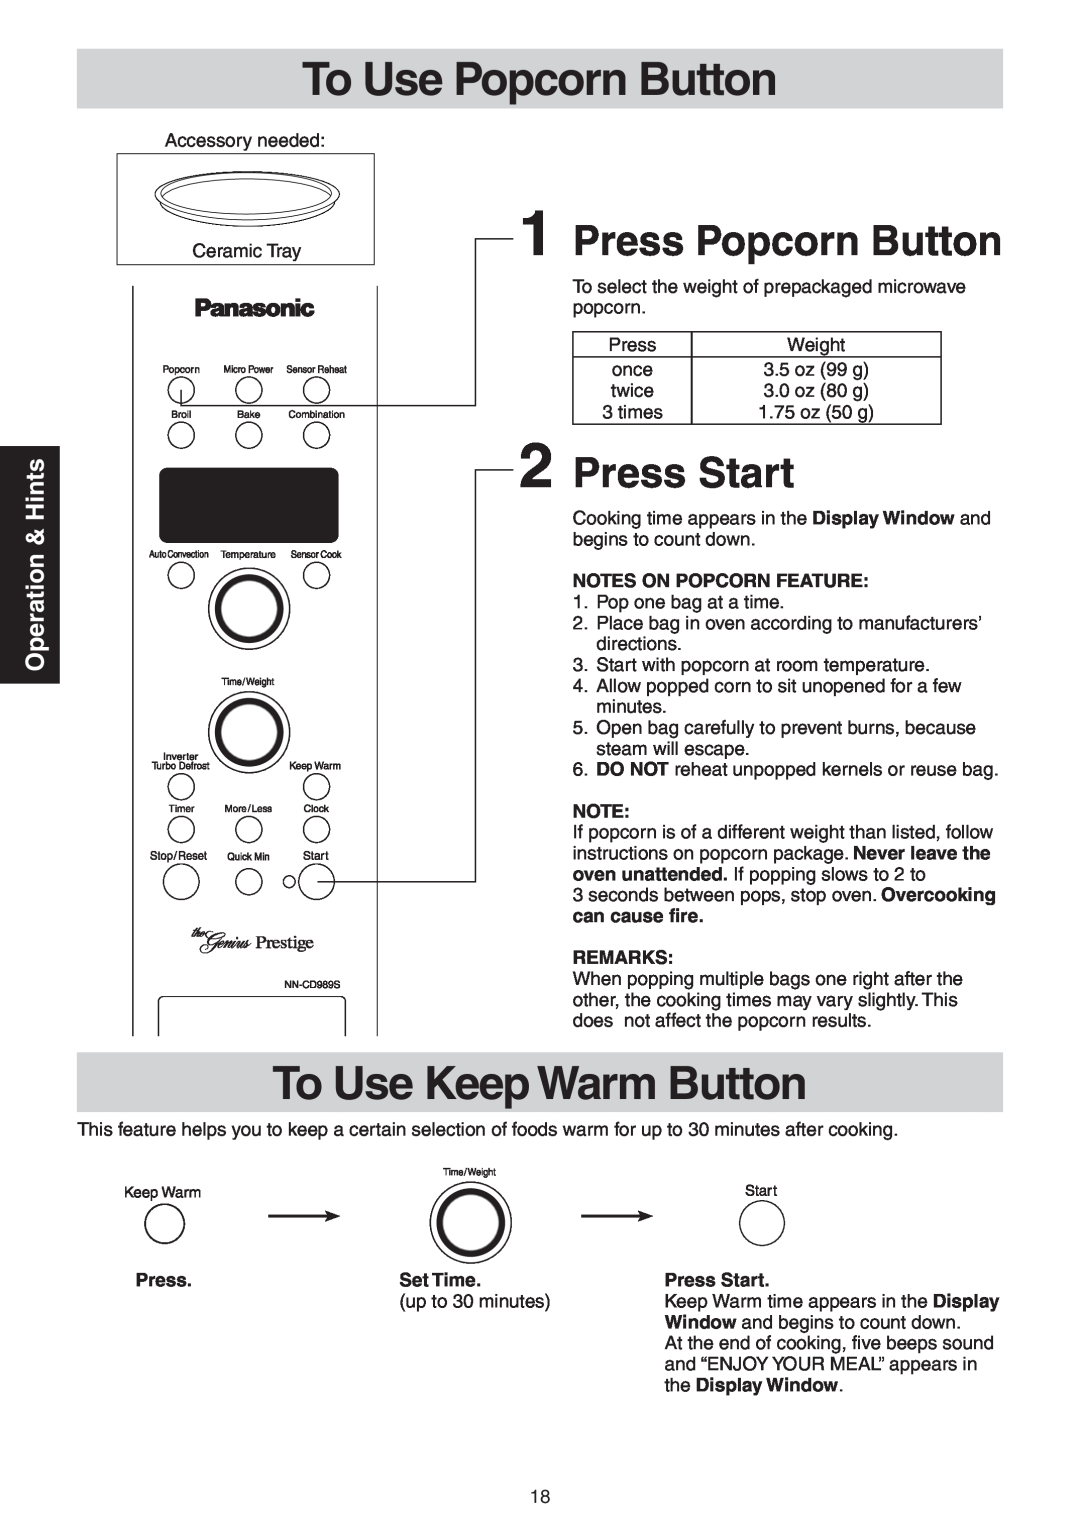 Panasonic NN-CD989S To Use Popcorn Button, To Use Keep Warm Button, 1Press Popcorn Button, 2Press Start, Operation & Hints 